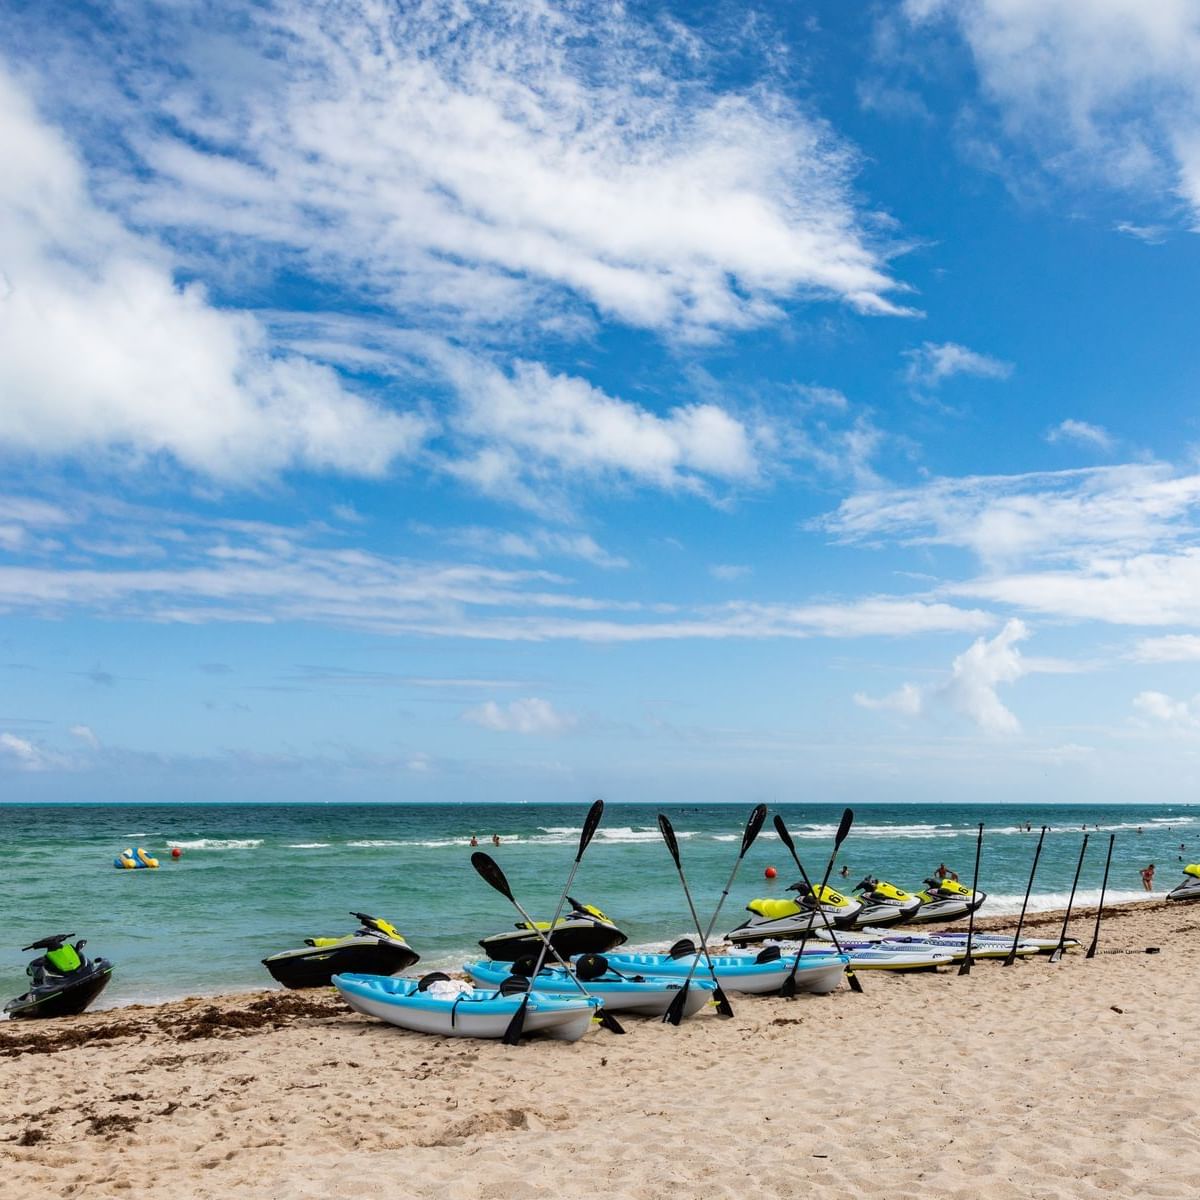 View of Kayaks Parked on the beach near DOT Hotels